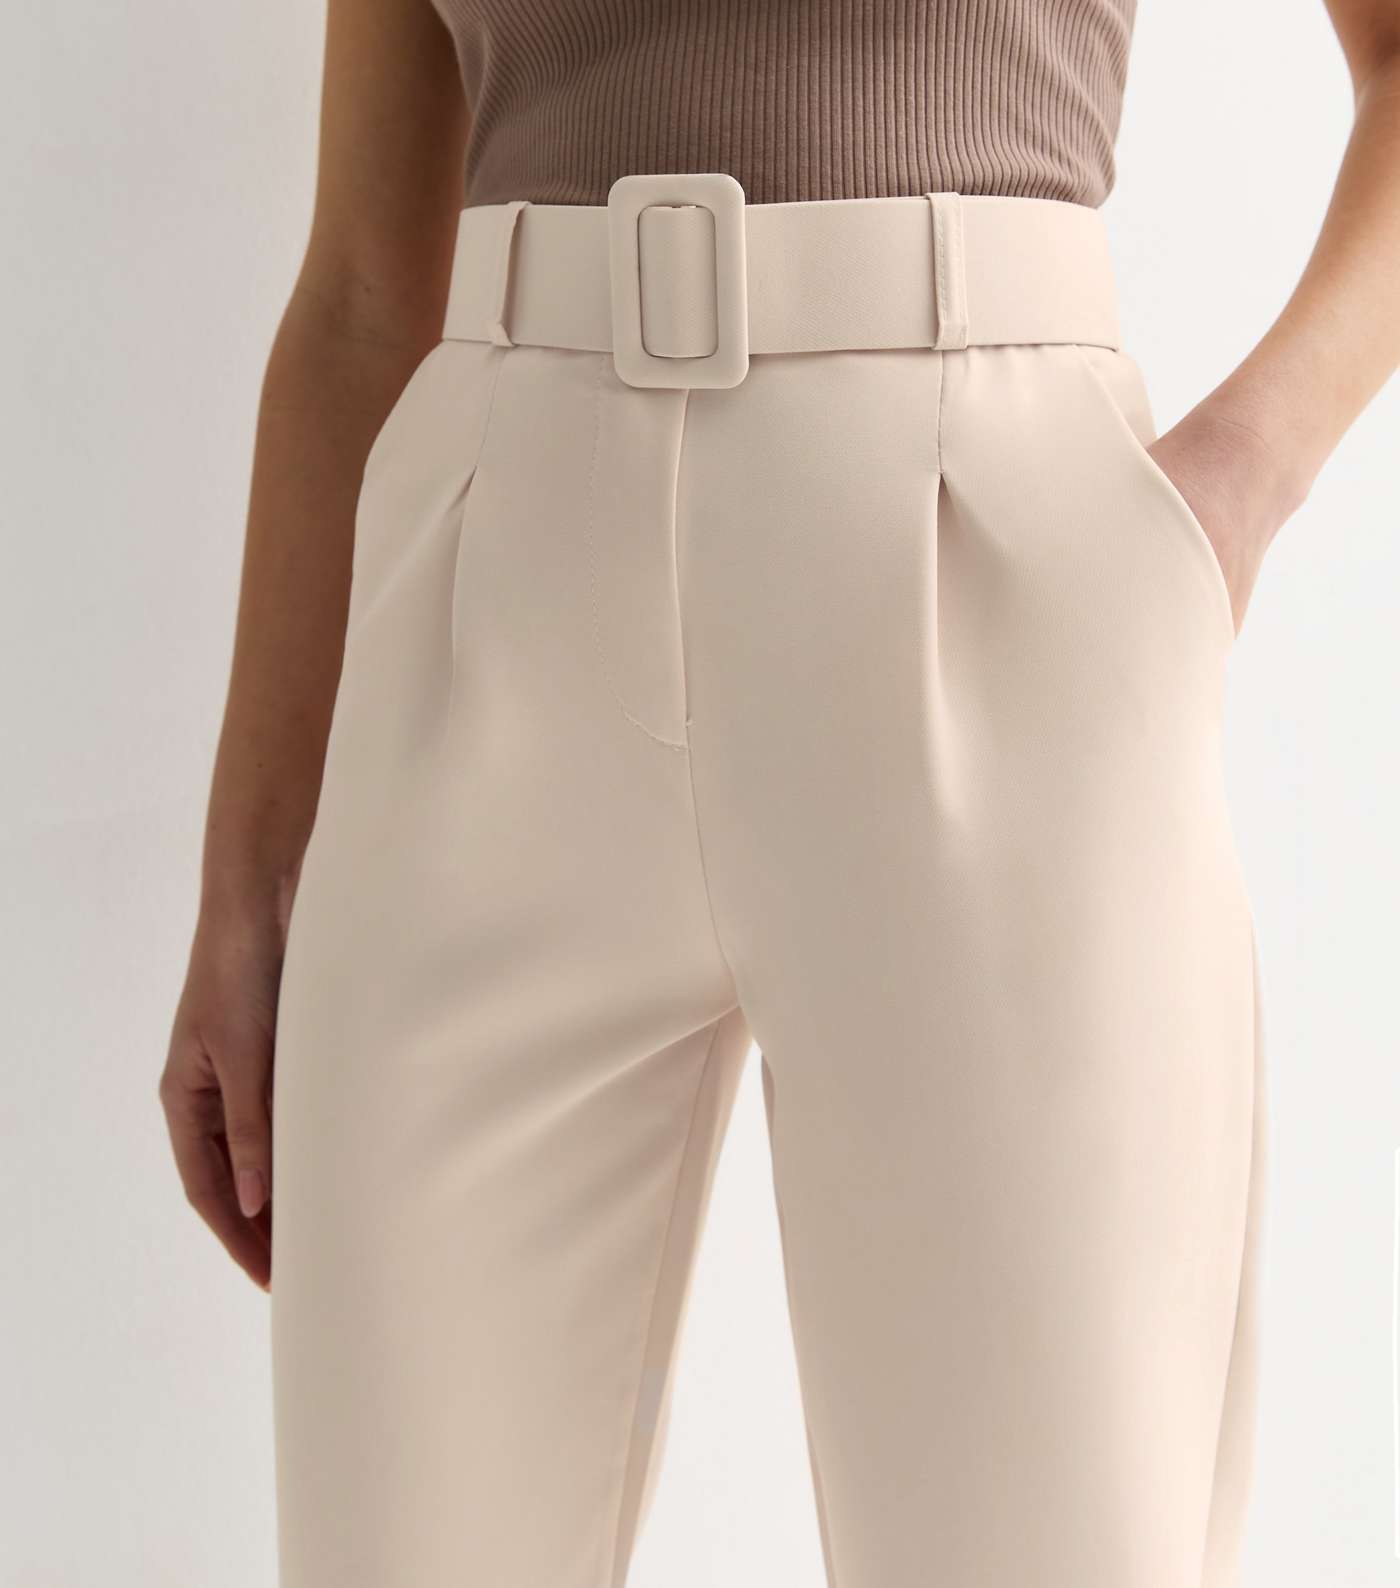 Gini London Cream Tapered Trousers Image 3